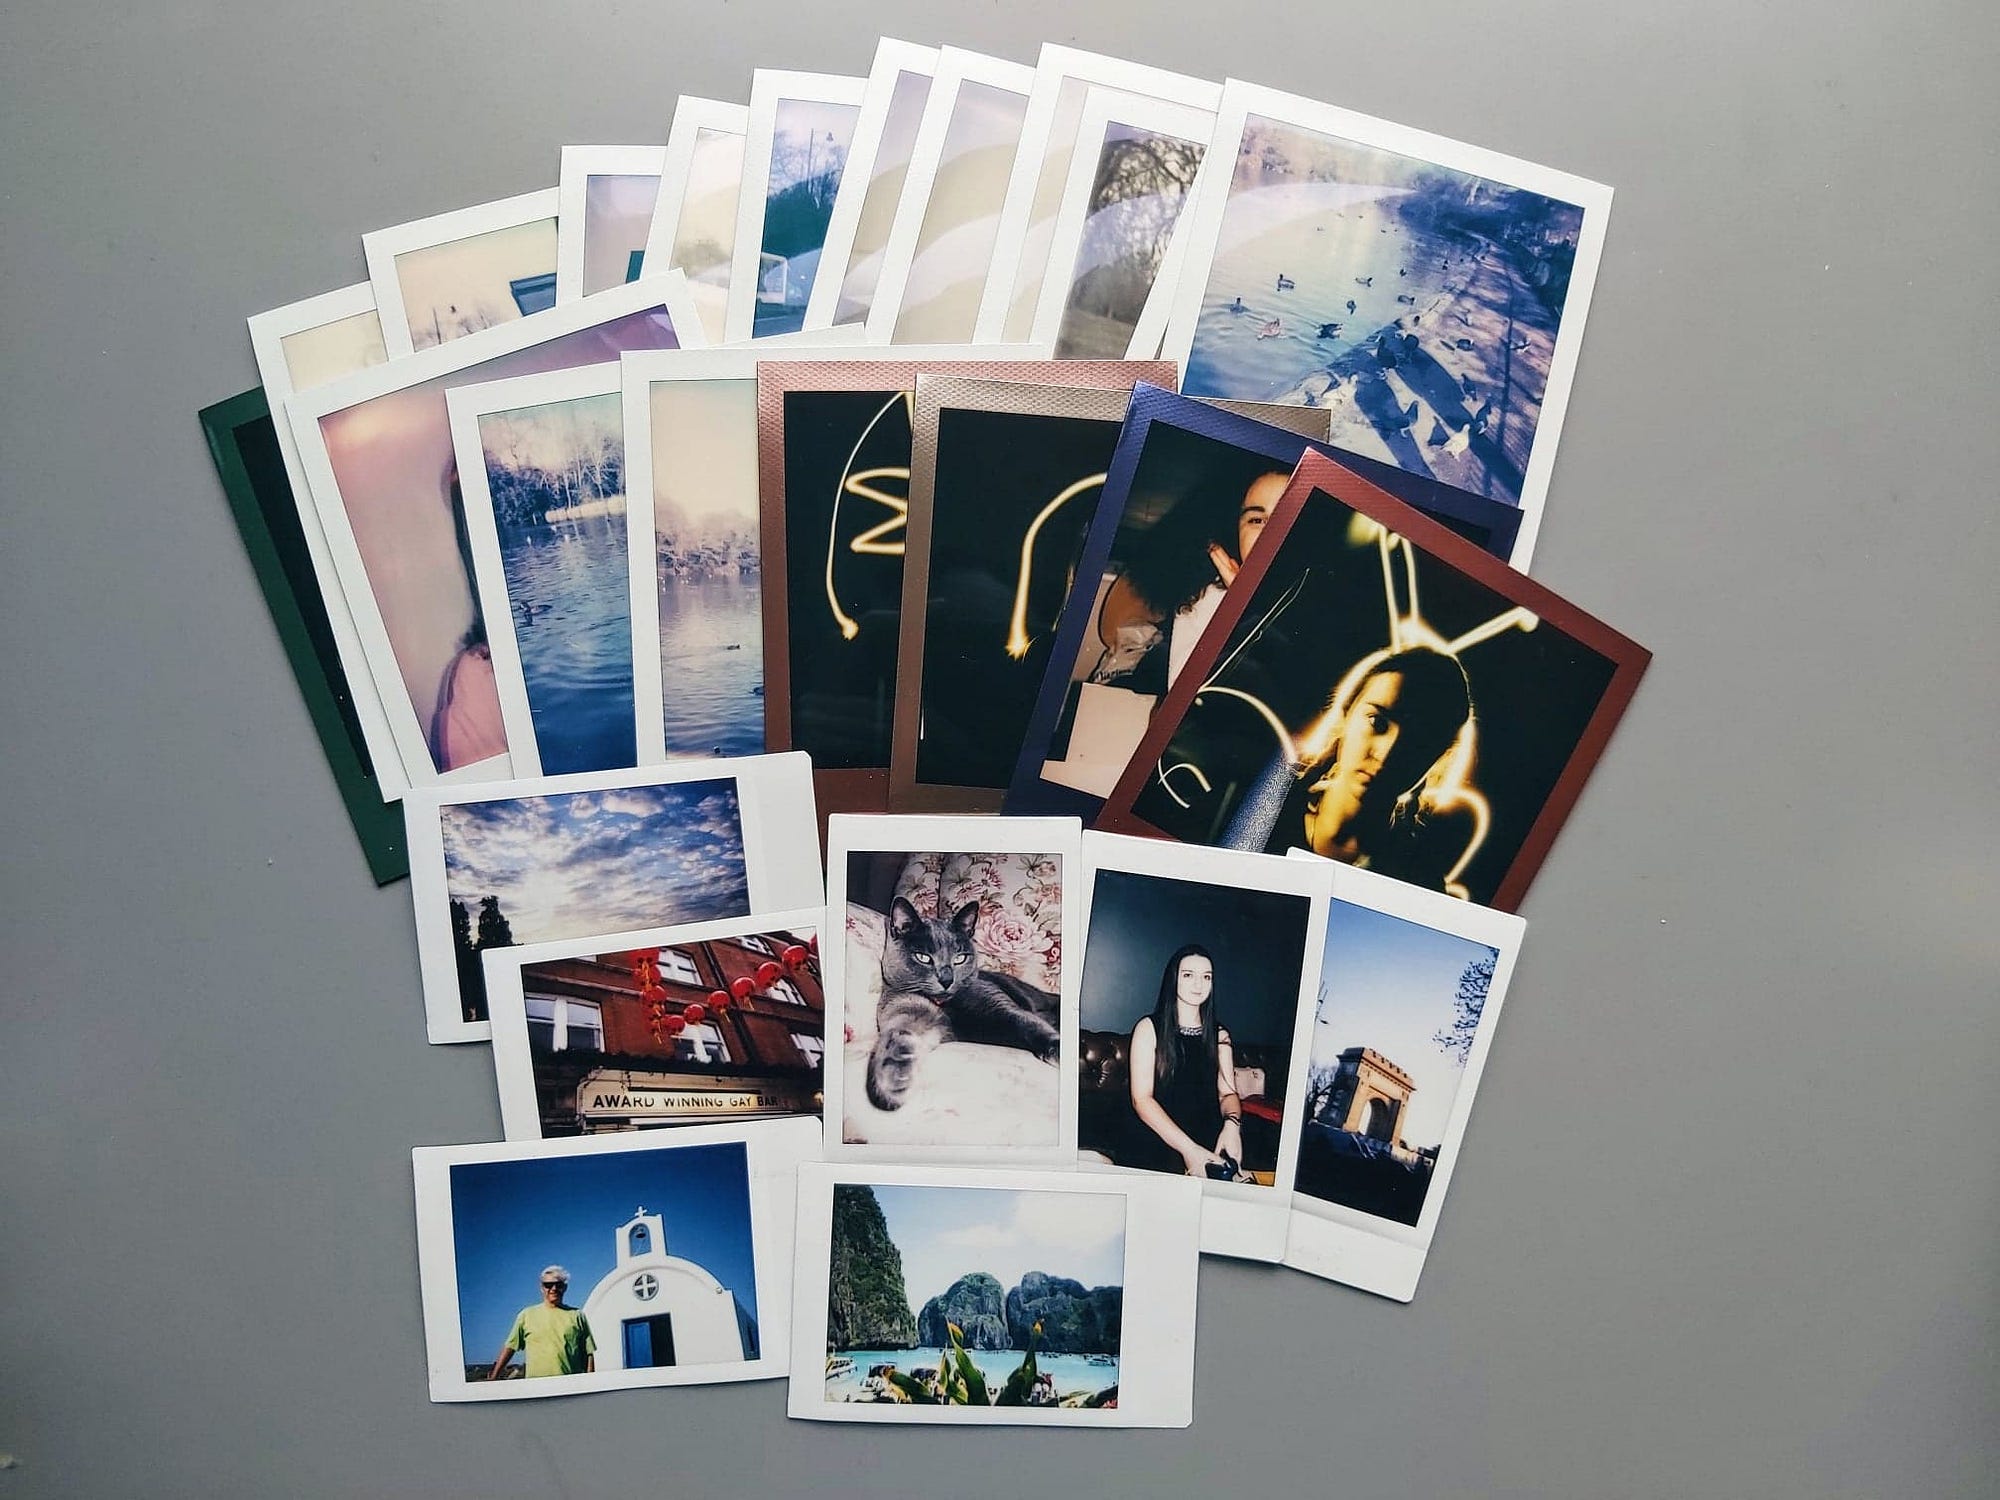 Fujifilm Instax vs Polaroid: Which is the Best for Instant